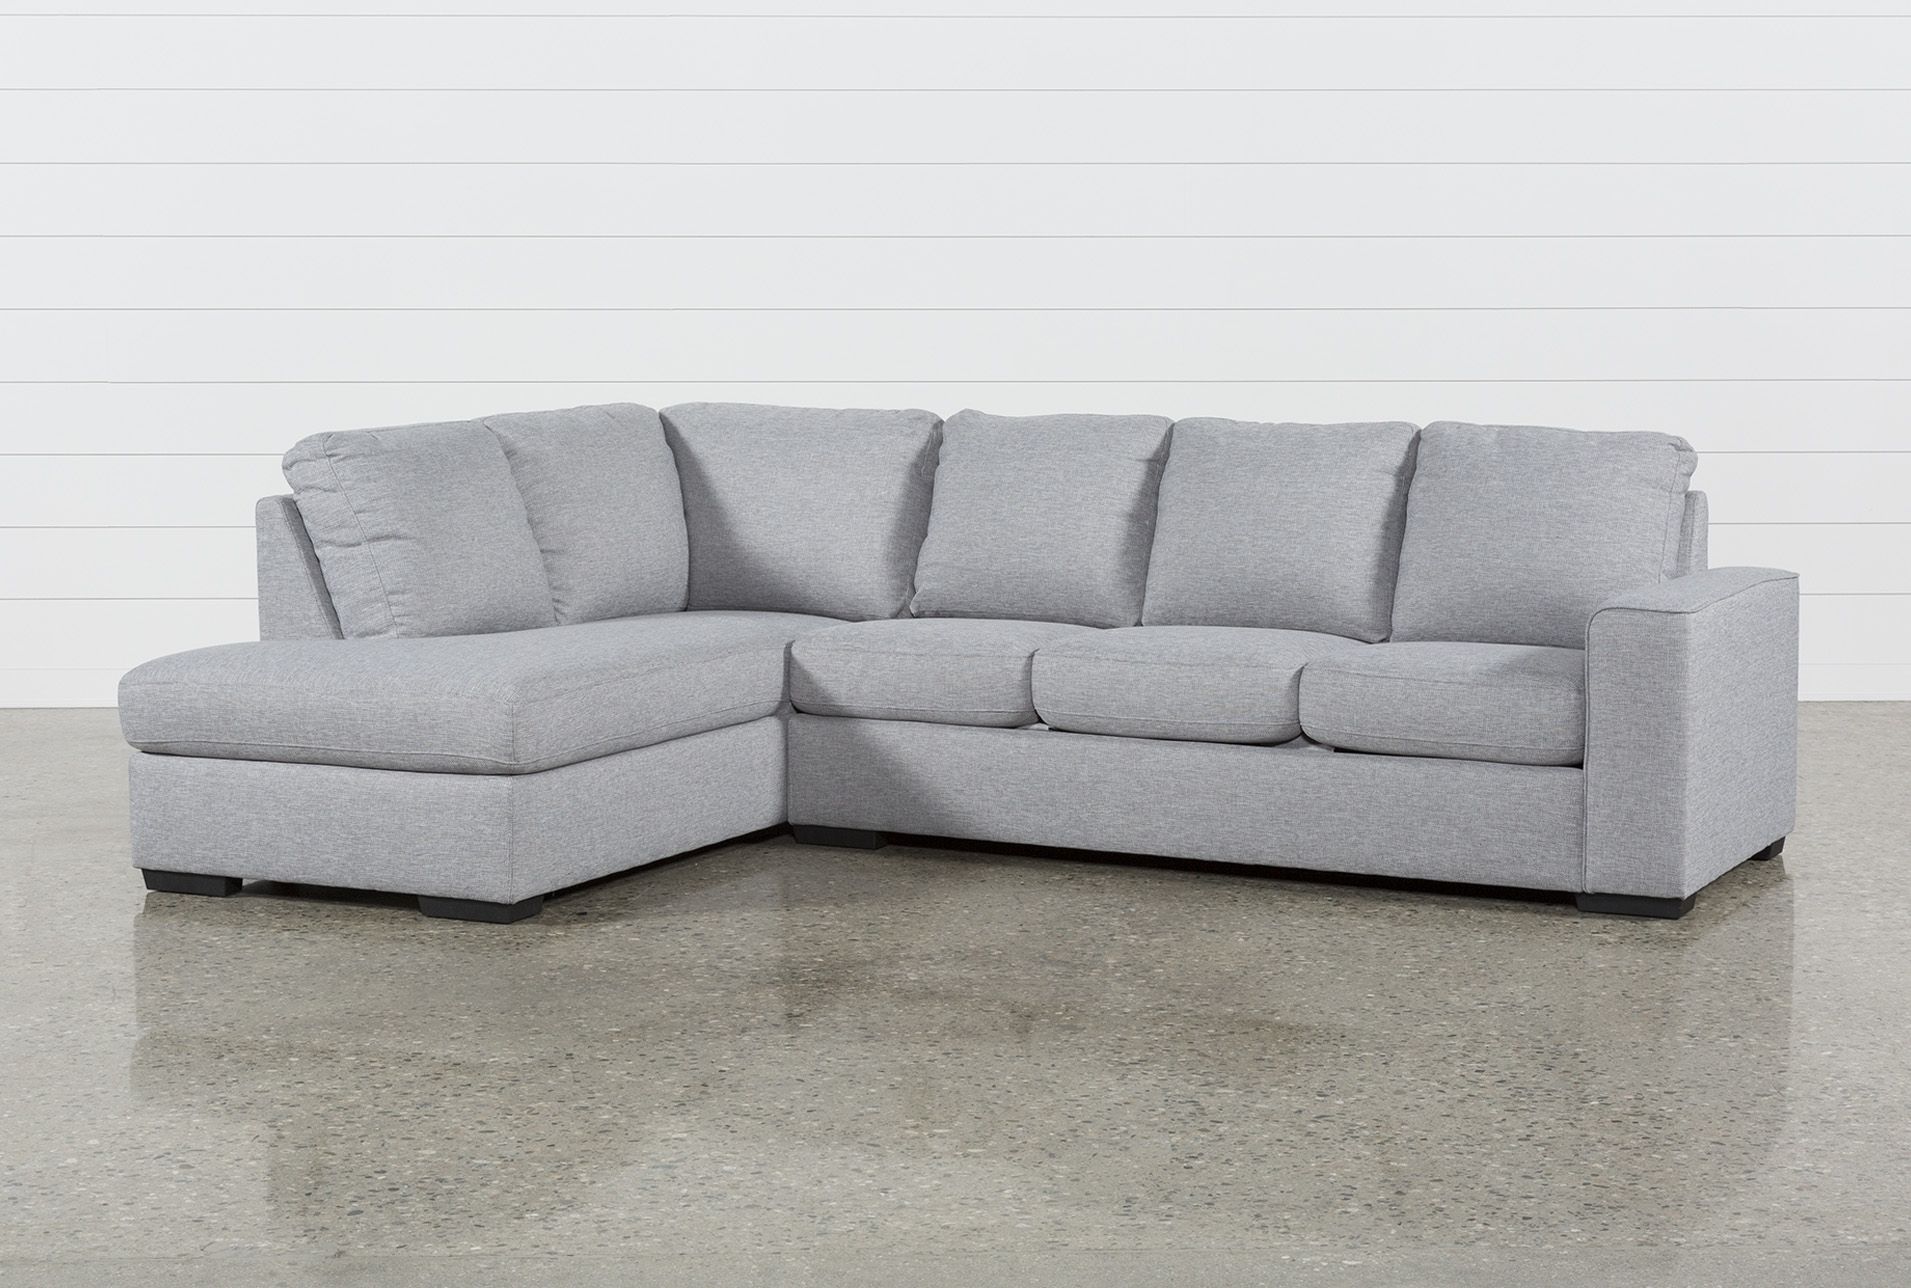 Lucy Grey 2 Piece Sectional W/laf Chaise | Products Throughout Lucy Dark Grey 2 Piece Sectionals With Raf Chaise (View 5 of 30)